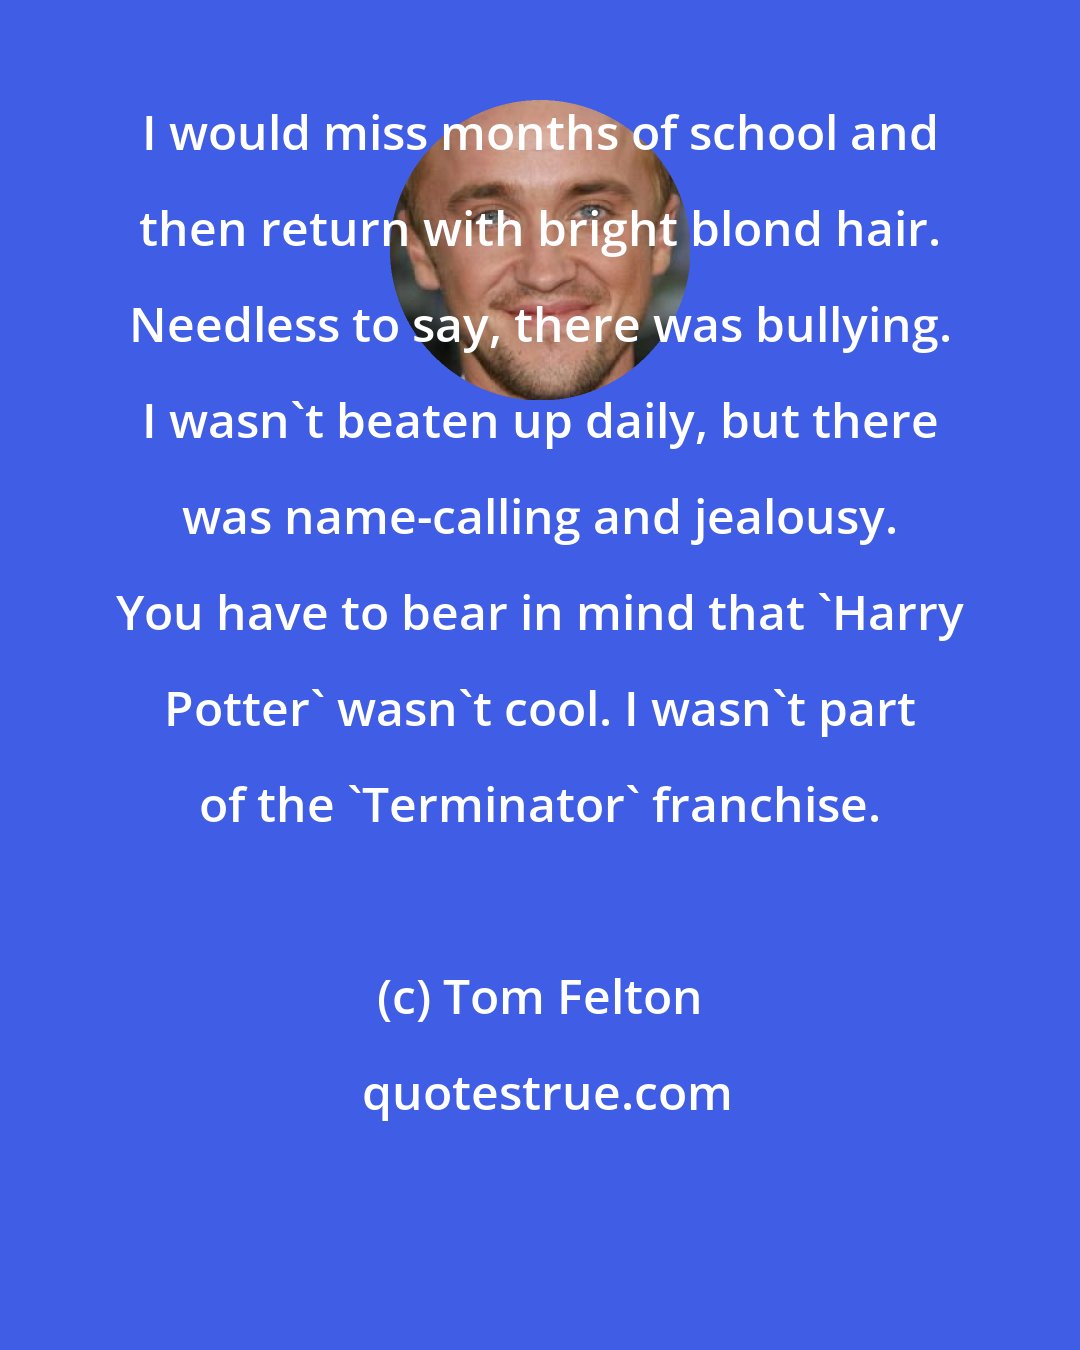 Tom Felton: I would miss months of school and then return with bright blond hair. Needless to say, there was bullying. I wasn't beaten up daily, but there was name-calling and jealousy. You have to bear in mind that 'Harry Potter' wasn't cool. I wasn't part of the 'Terminator' franchise.